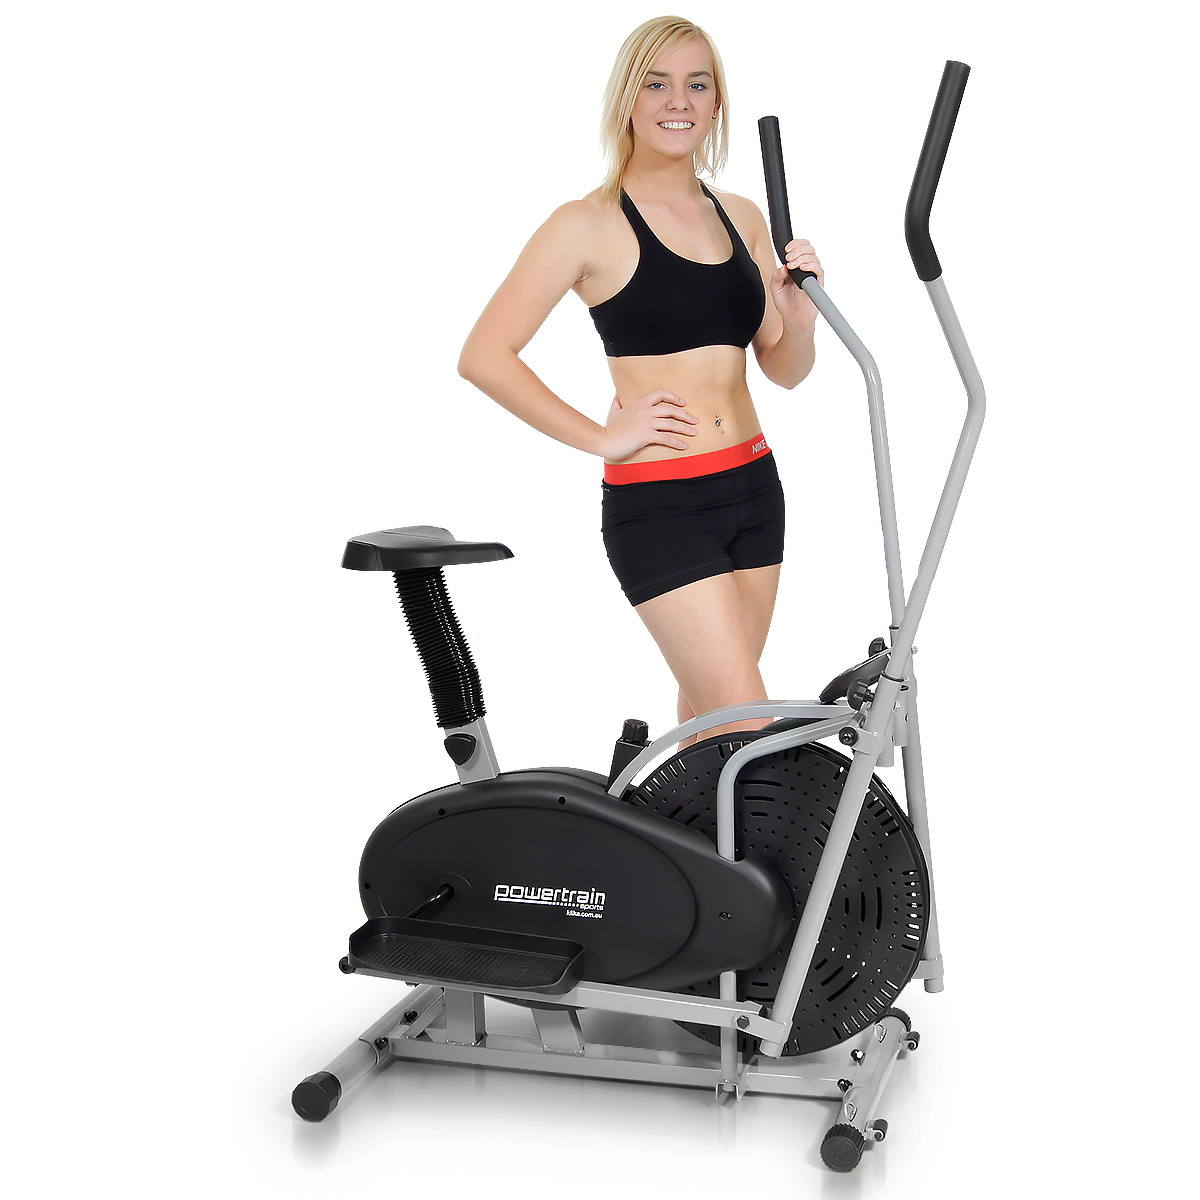 Powertrain 2-in-1 Elliptical Cross Trainer and Exercise Bike Price